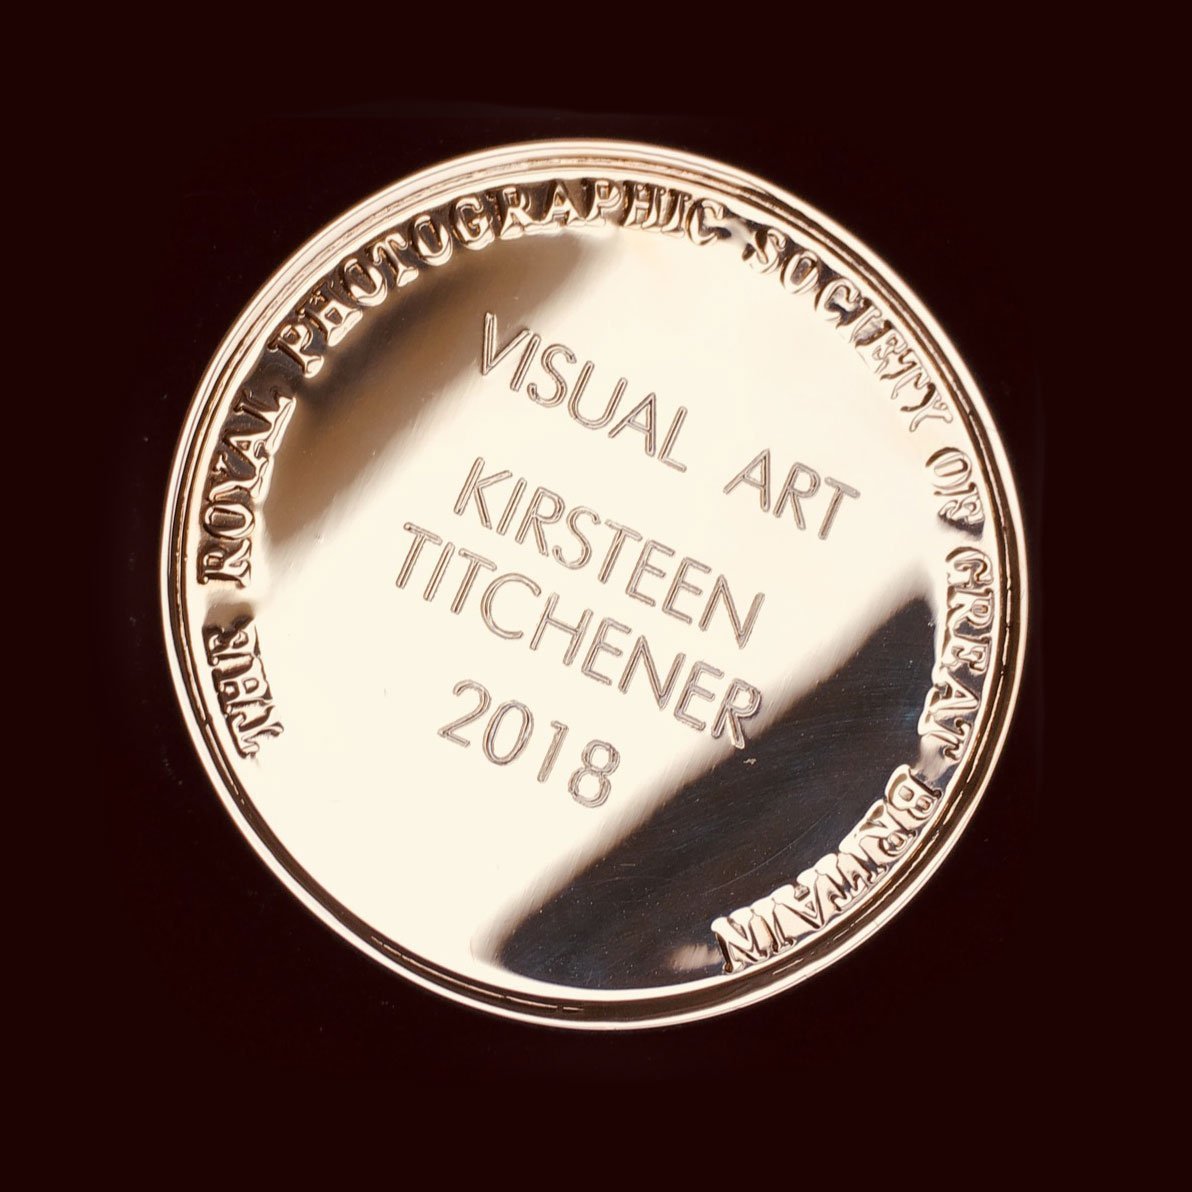 Visual Art Gold medal awarded to Kirsteen Titchener 2018